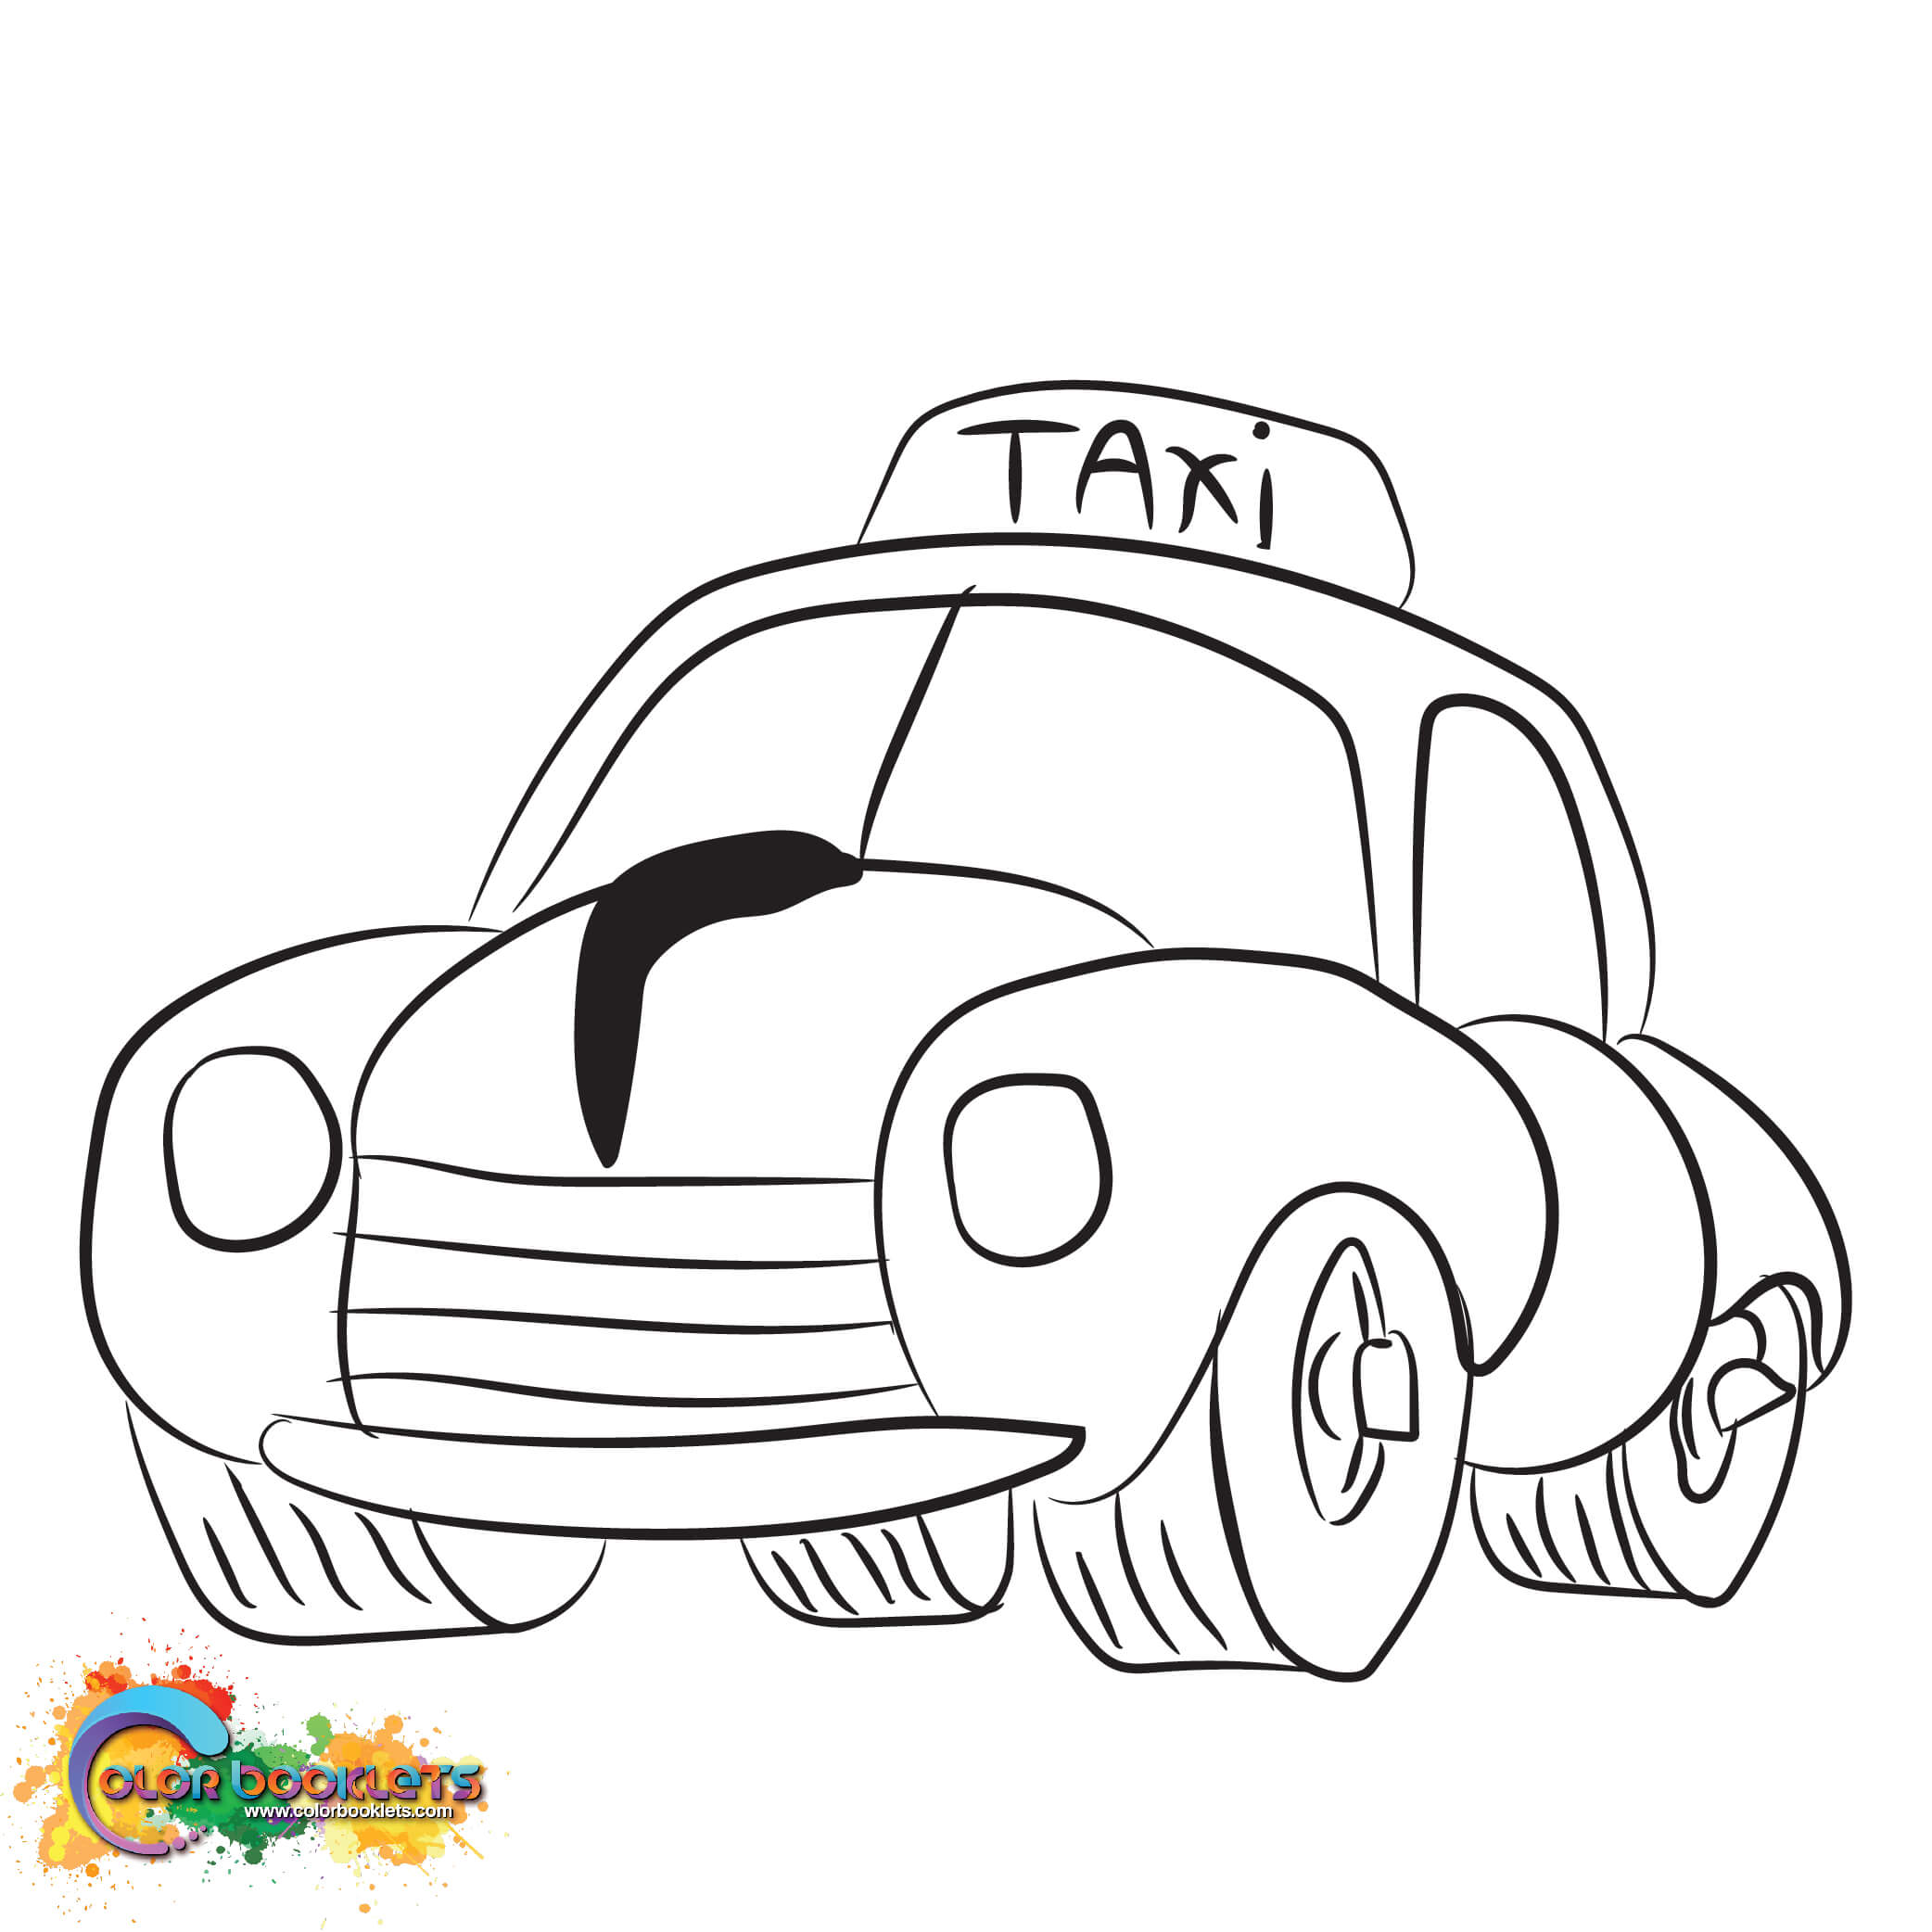 Colorbooklets | Cartoon Taxi Coloring page